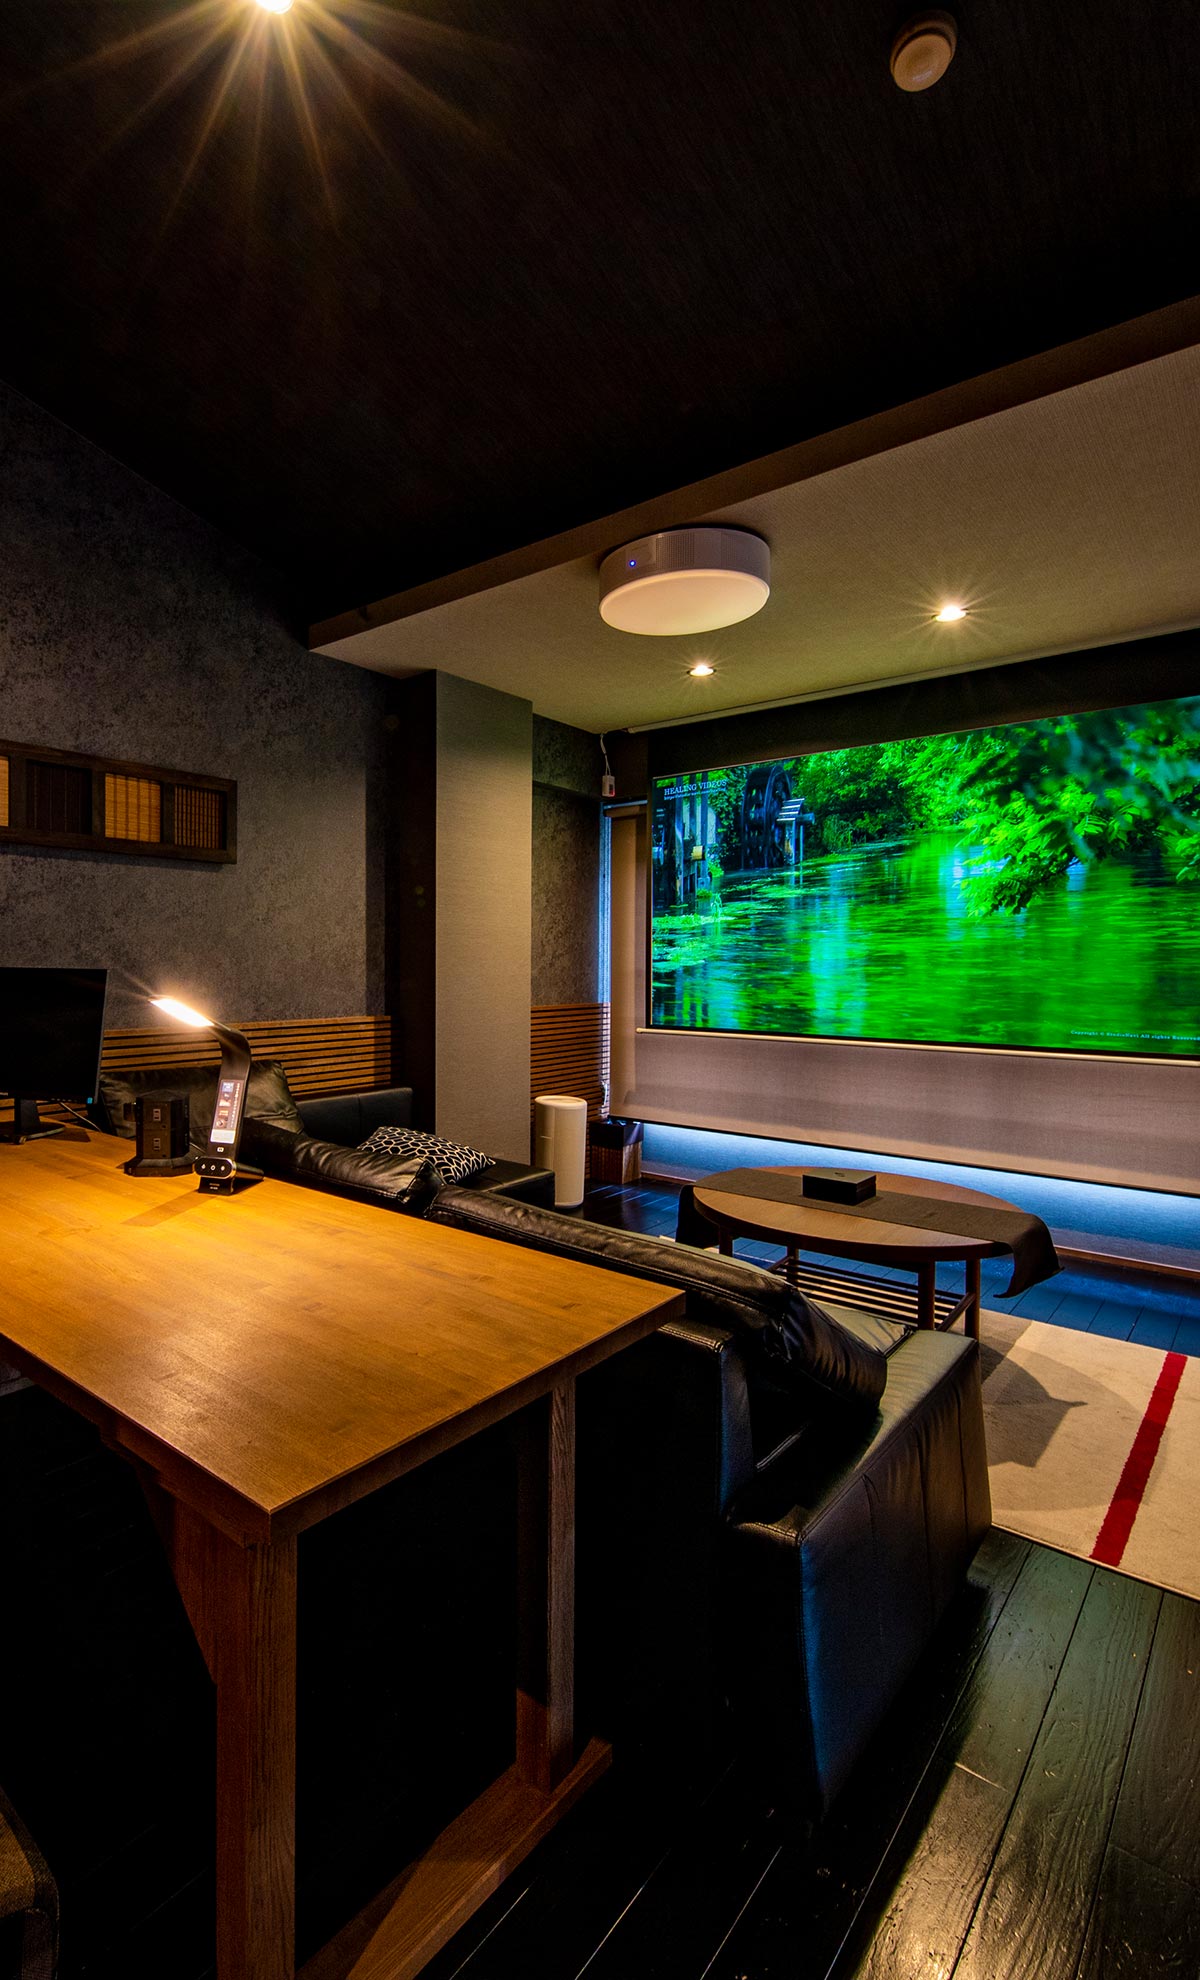 100-inch projector system